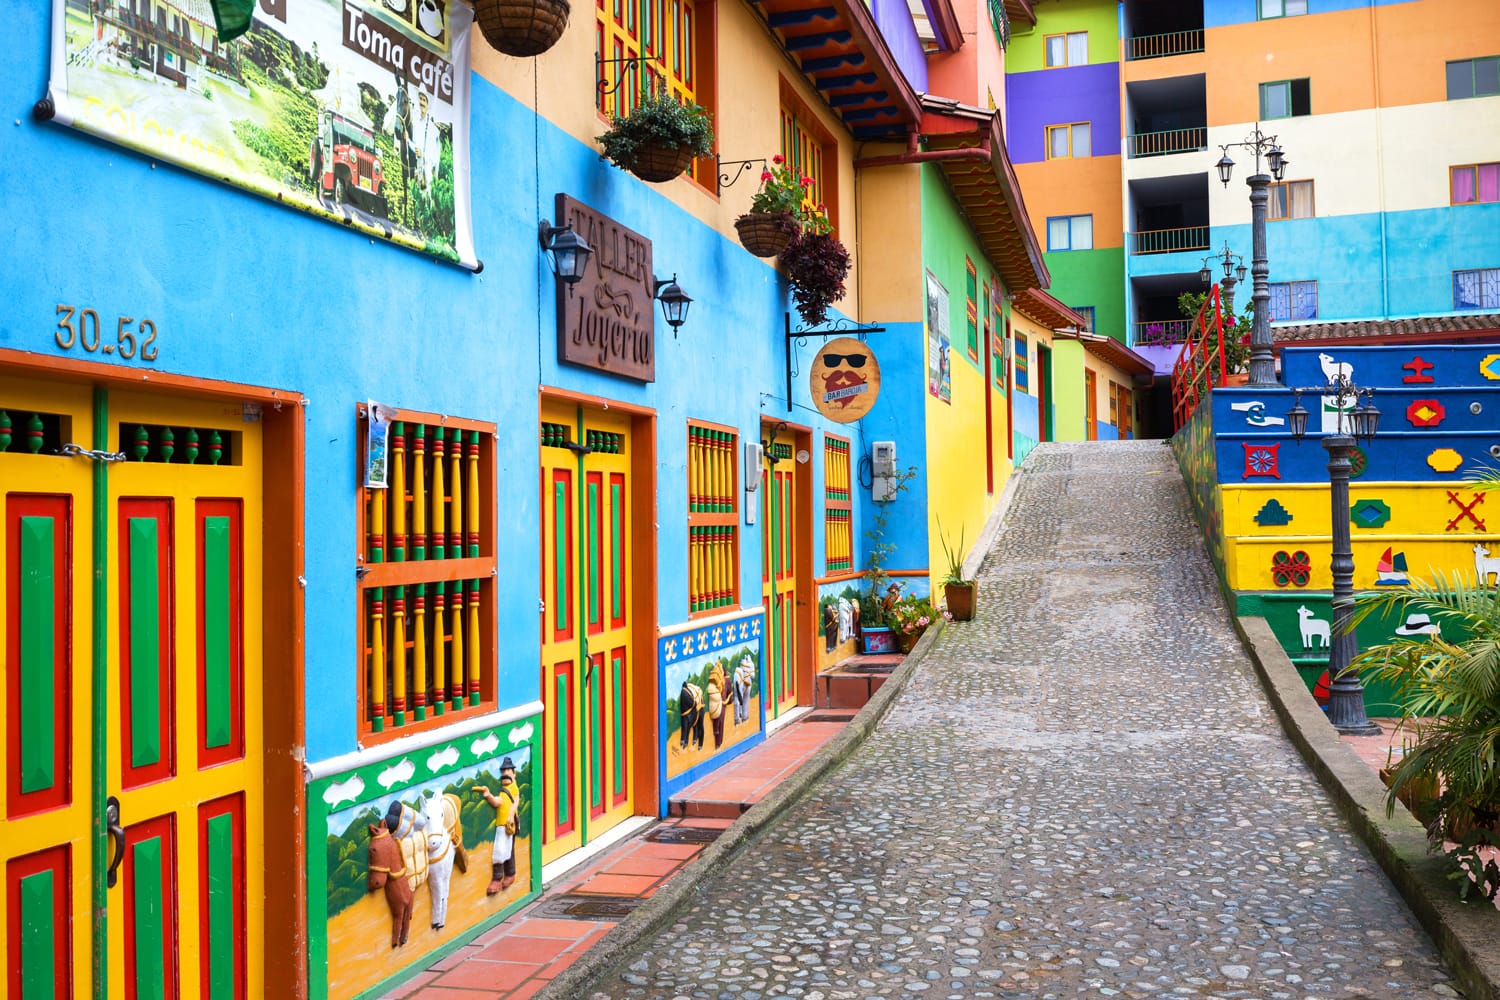 Colorful streets and decorated houses of Guatape city near Medellin, Antioquia, Colombia